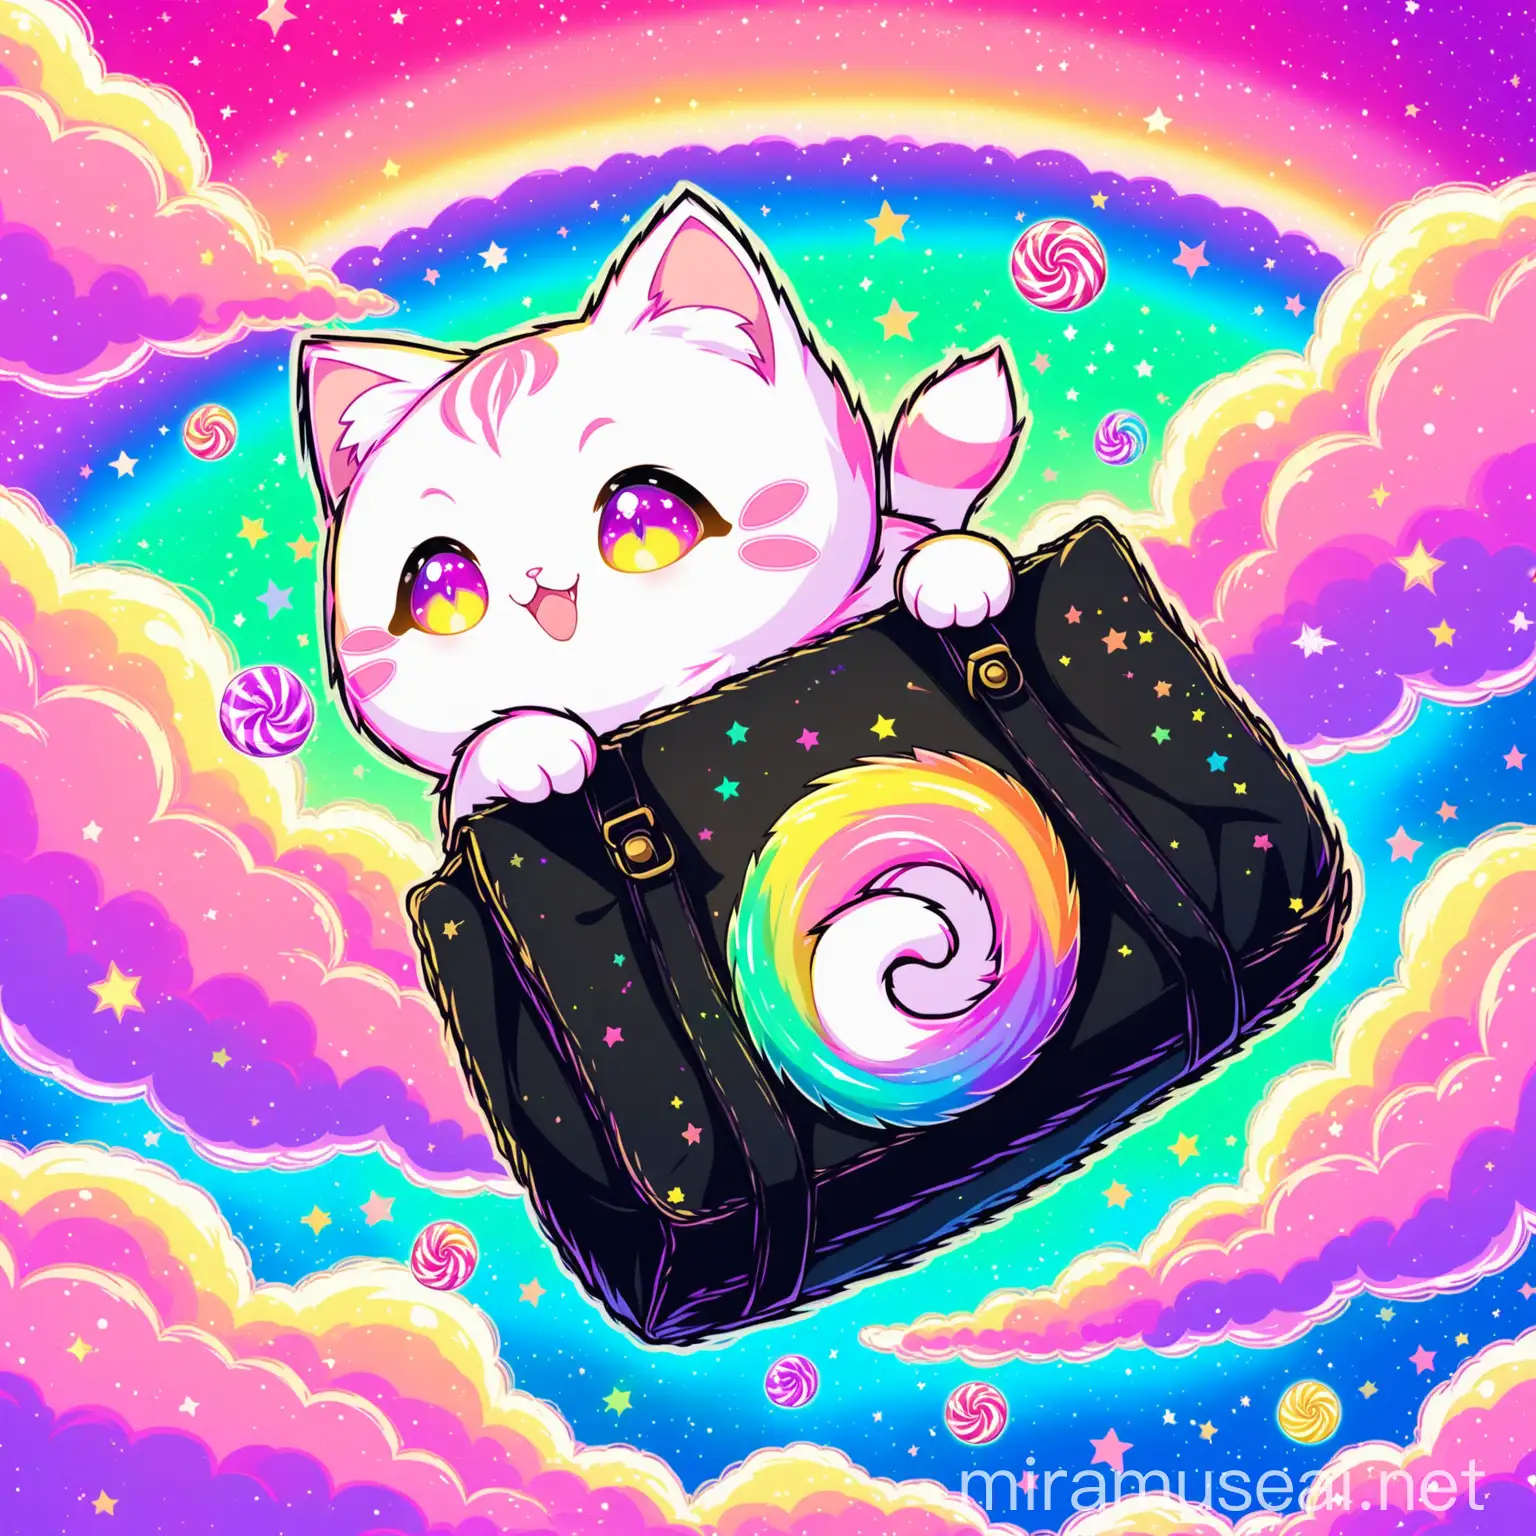 yuru-kyara cat escaping from a large black bag style of multicolor candy colors sky clouds magical fantasy psychedelic kawaii